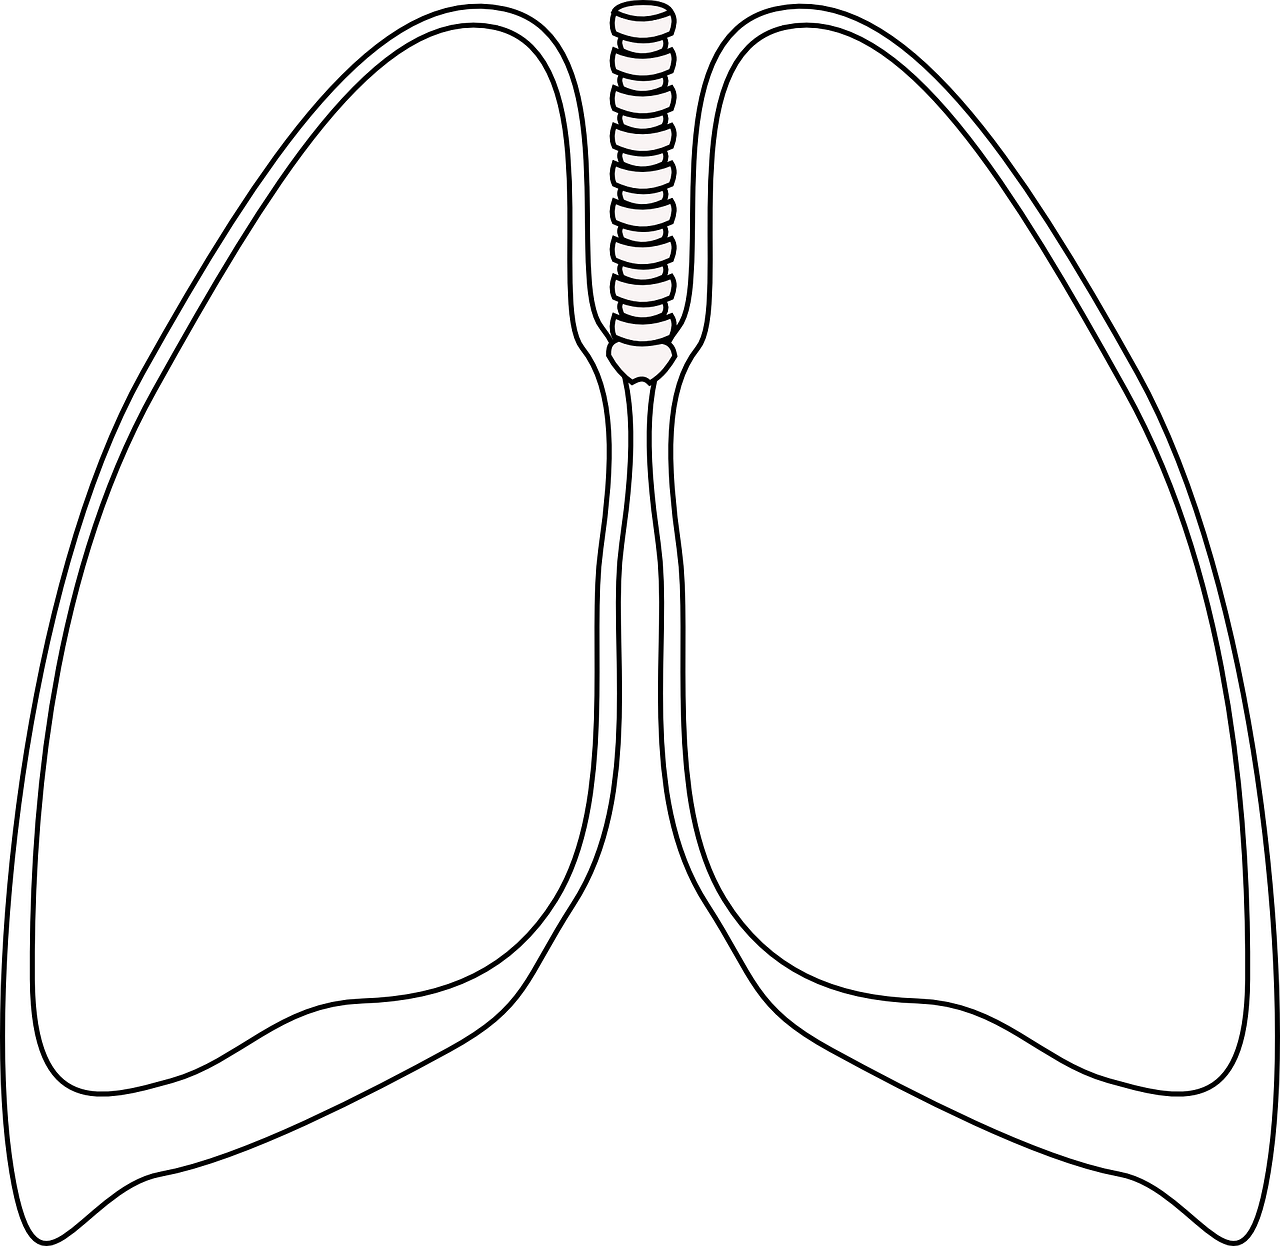 lungs-308055_1280